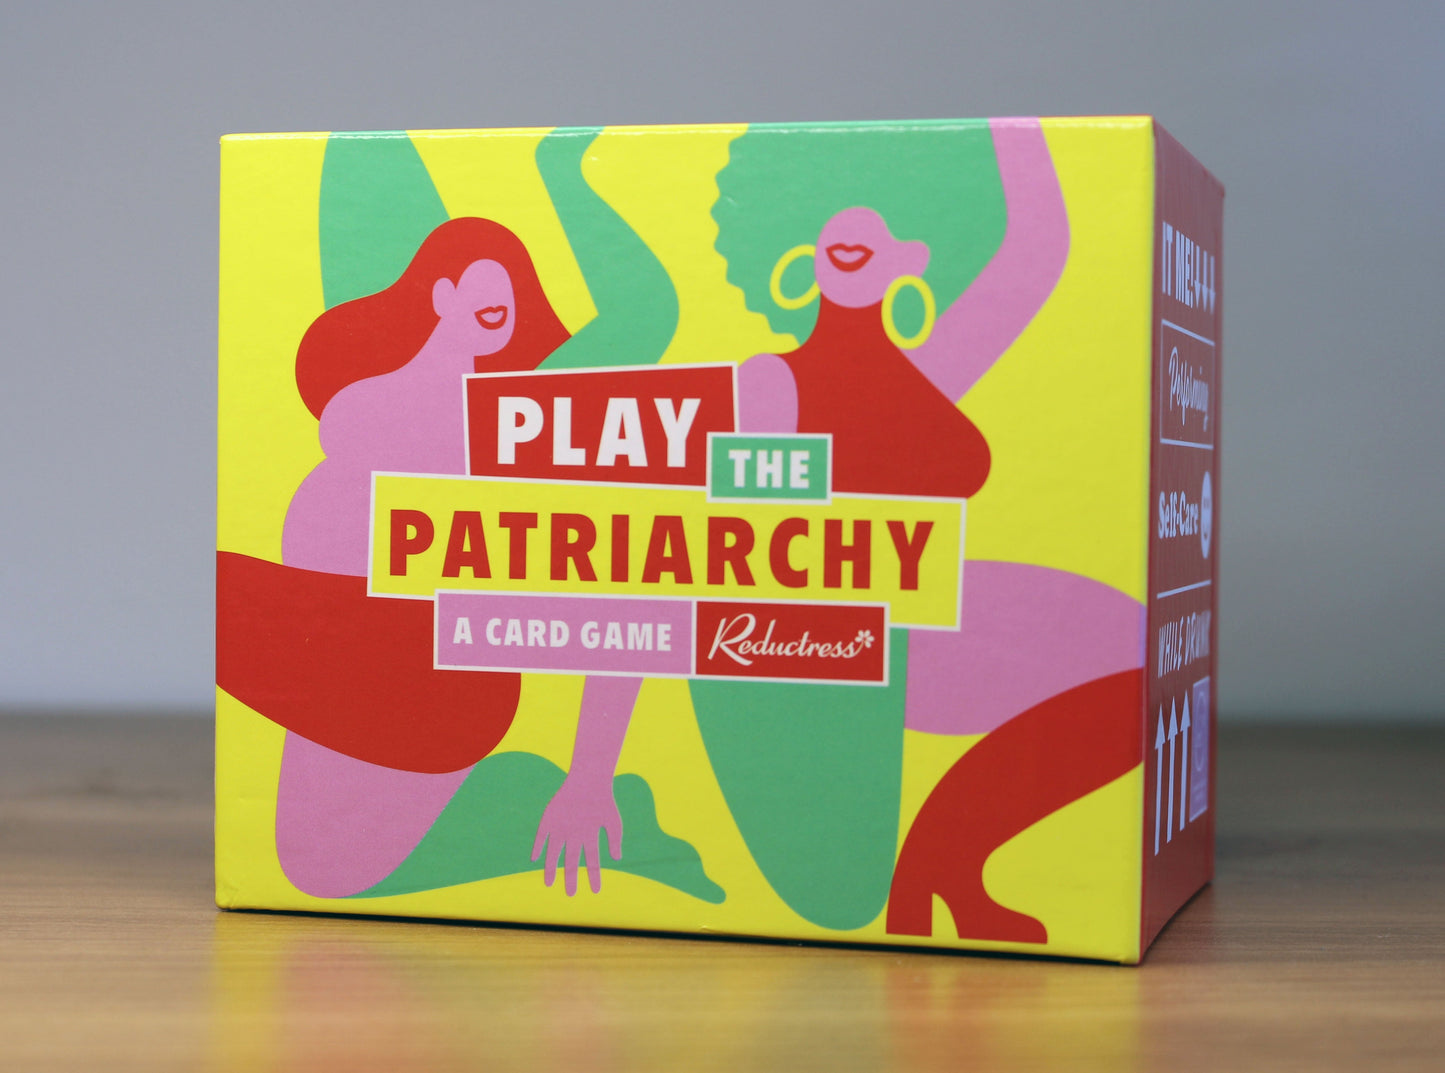 Reductress Presents: Play the Patriarchy! Card Game